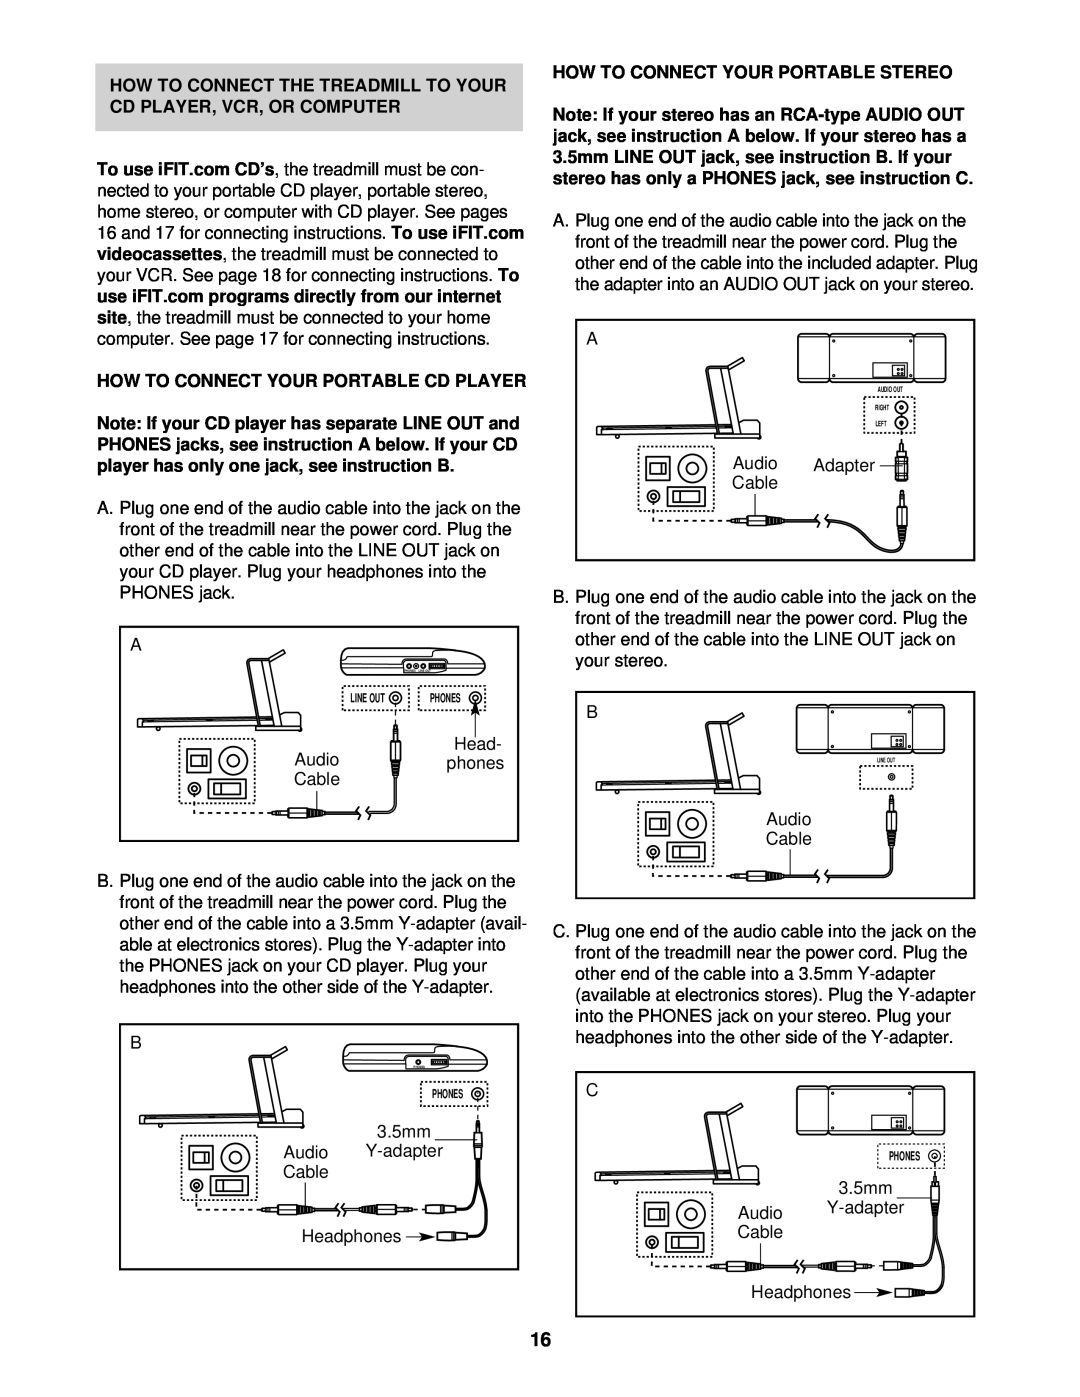 ProForm PFTL59121 How To Connect The Treadmill To Your Cd Player, Vcr, Or Computer, How To Connect Your Portable Cd Player 